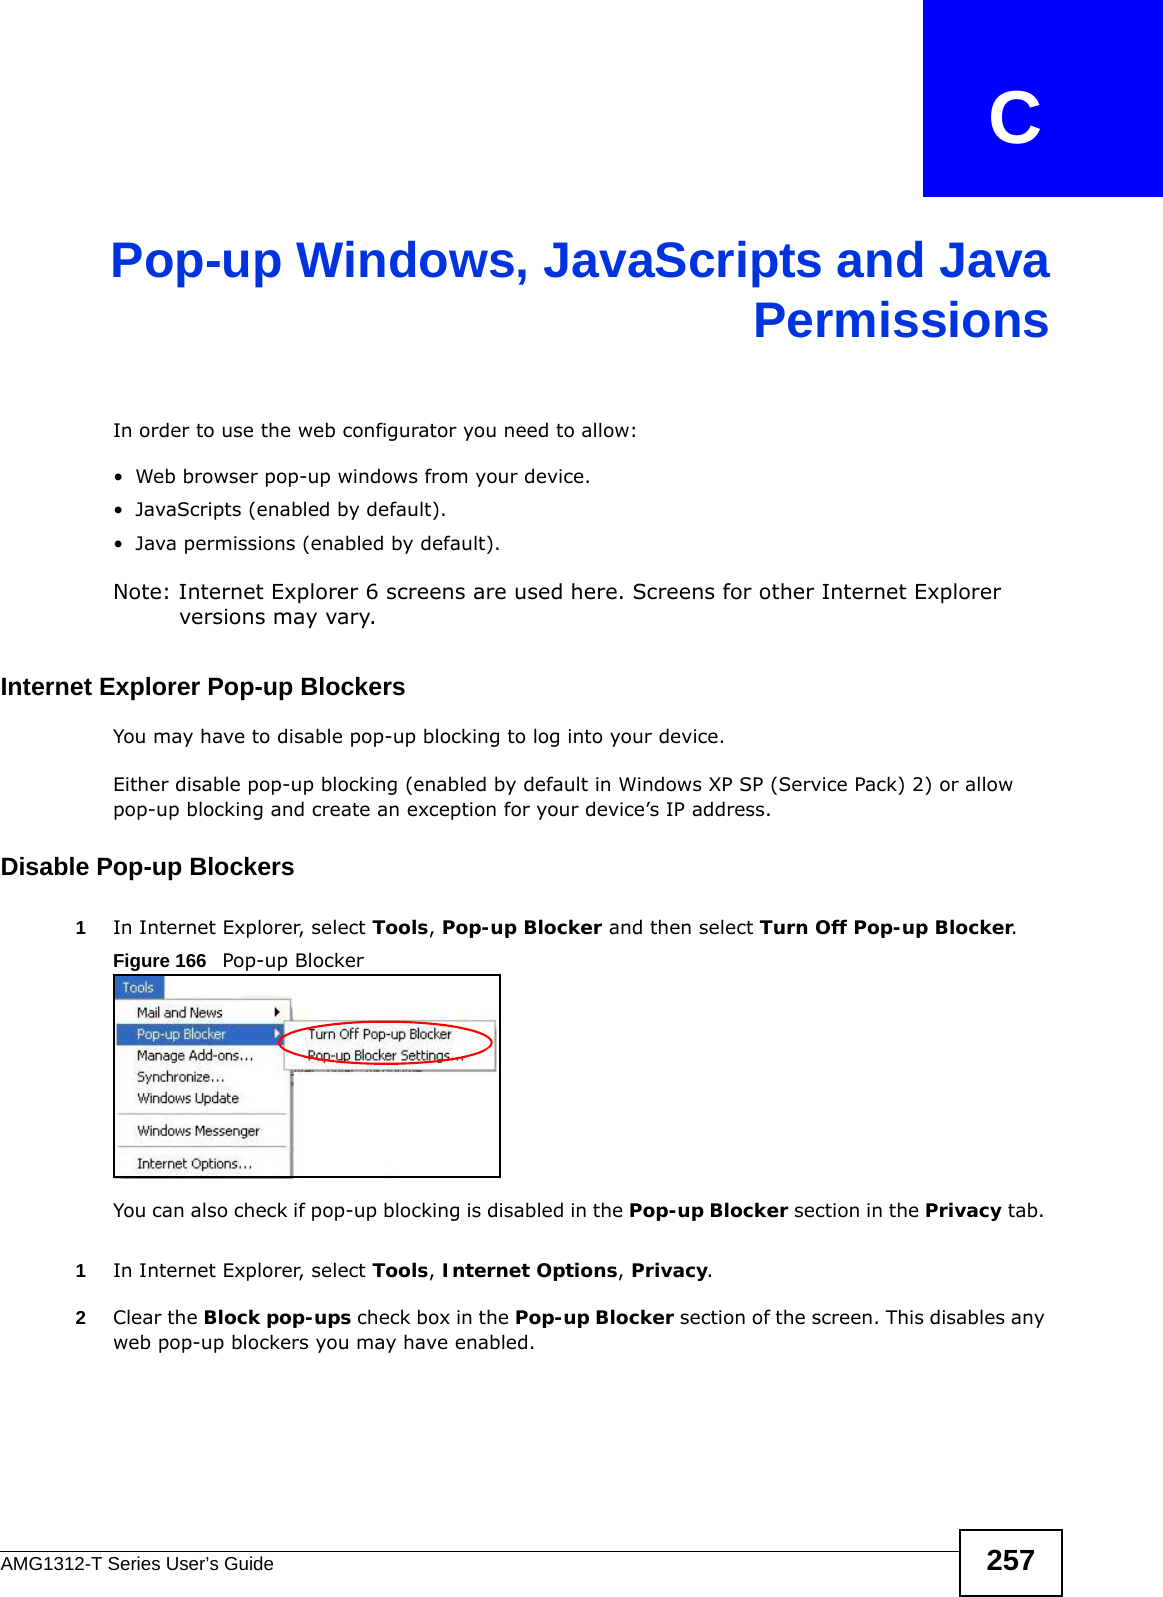 AMG1312-T Series User’s Guide 257APPENDIX   CPop-up Windows, JavaScripts and JavaPermissionsIn order to use the web configurator you need to allow:• Web browser pop-up windows from your device.• JavaScripts (enabled by default).• Java permissions (enabled by default).Note: Internet Explorer 6 screens are used here. Screens for other Internet Explorer versions may vary.Internet Explorer Pop-up BlockersYou may have to disable pop-up blocking to log into your device. Either disable pop-up blocking (enabled by default in Windows XP SP (Service Pack) 2) or allow pop-up blocking and create an exception for your device’s IP address.Disable Pop-up Blockers1In Internet Explorer, select Tools, Pop-up Blocker and then select Turn Off Pop-up Blocker. Figure 166   Pop-up BlockerYou can also check if pop-up blocking is disabled in the Pop-up Blocker section in the Privacy tab. 1In Internet Explorer, select Tools, Internet Options, Privacy.2Clear the Block pop-ups check box in the Pop-up Blocker section of the screen. This disables any web pop-up blockers you may have enabled. 